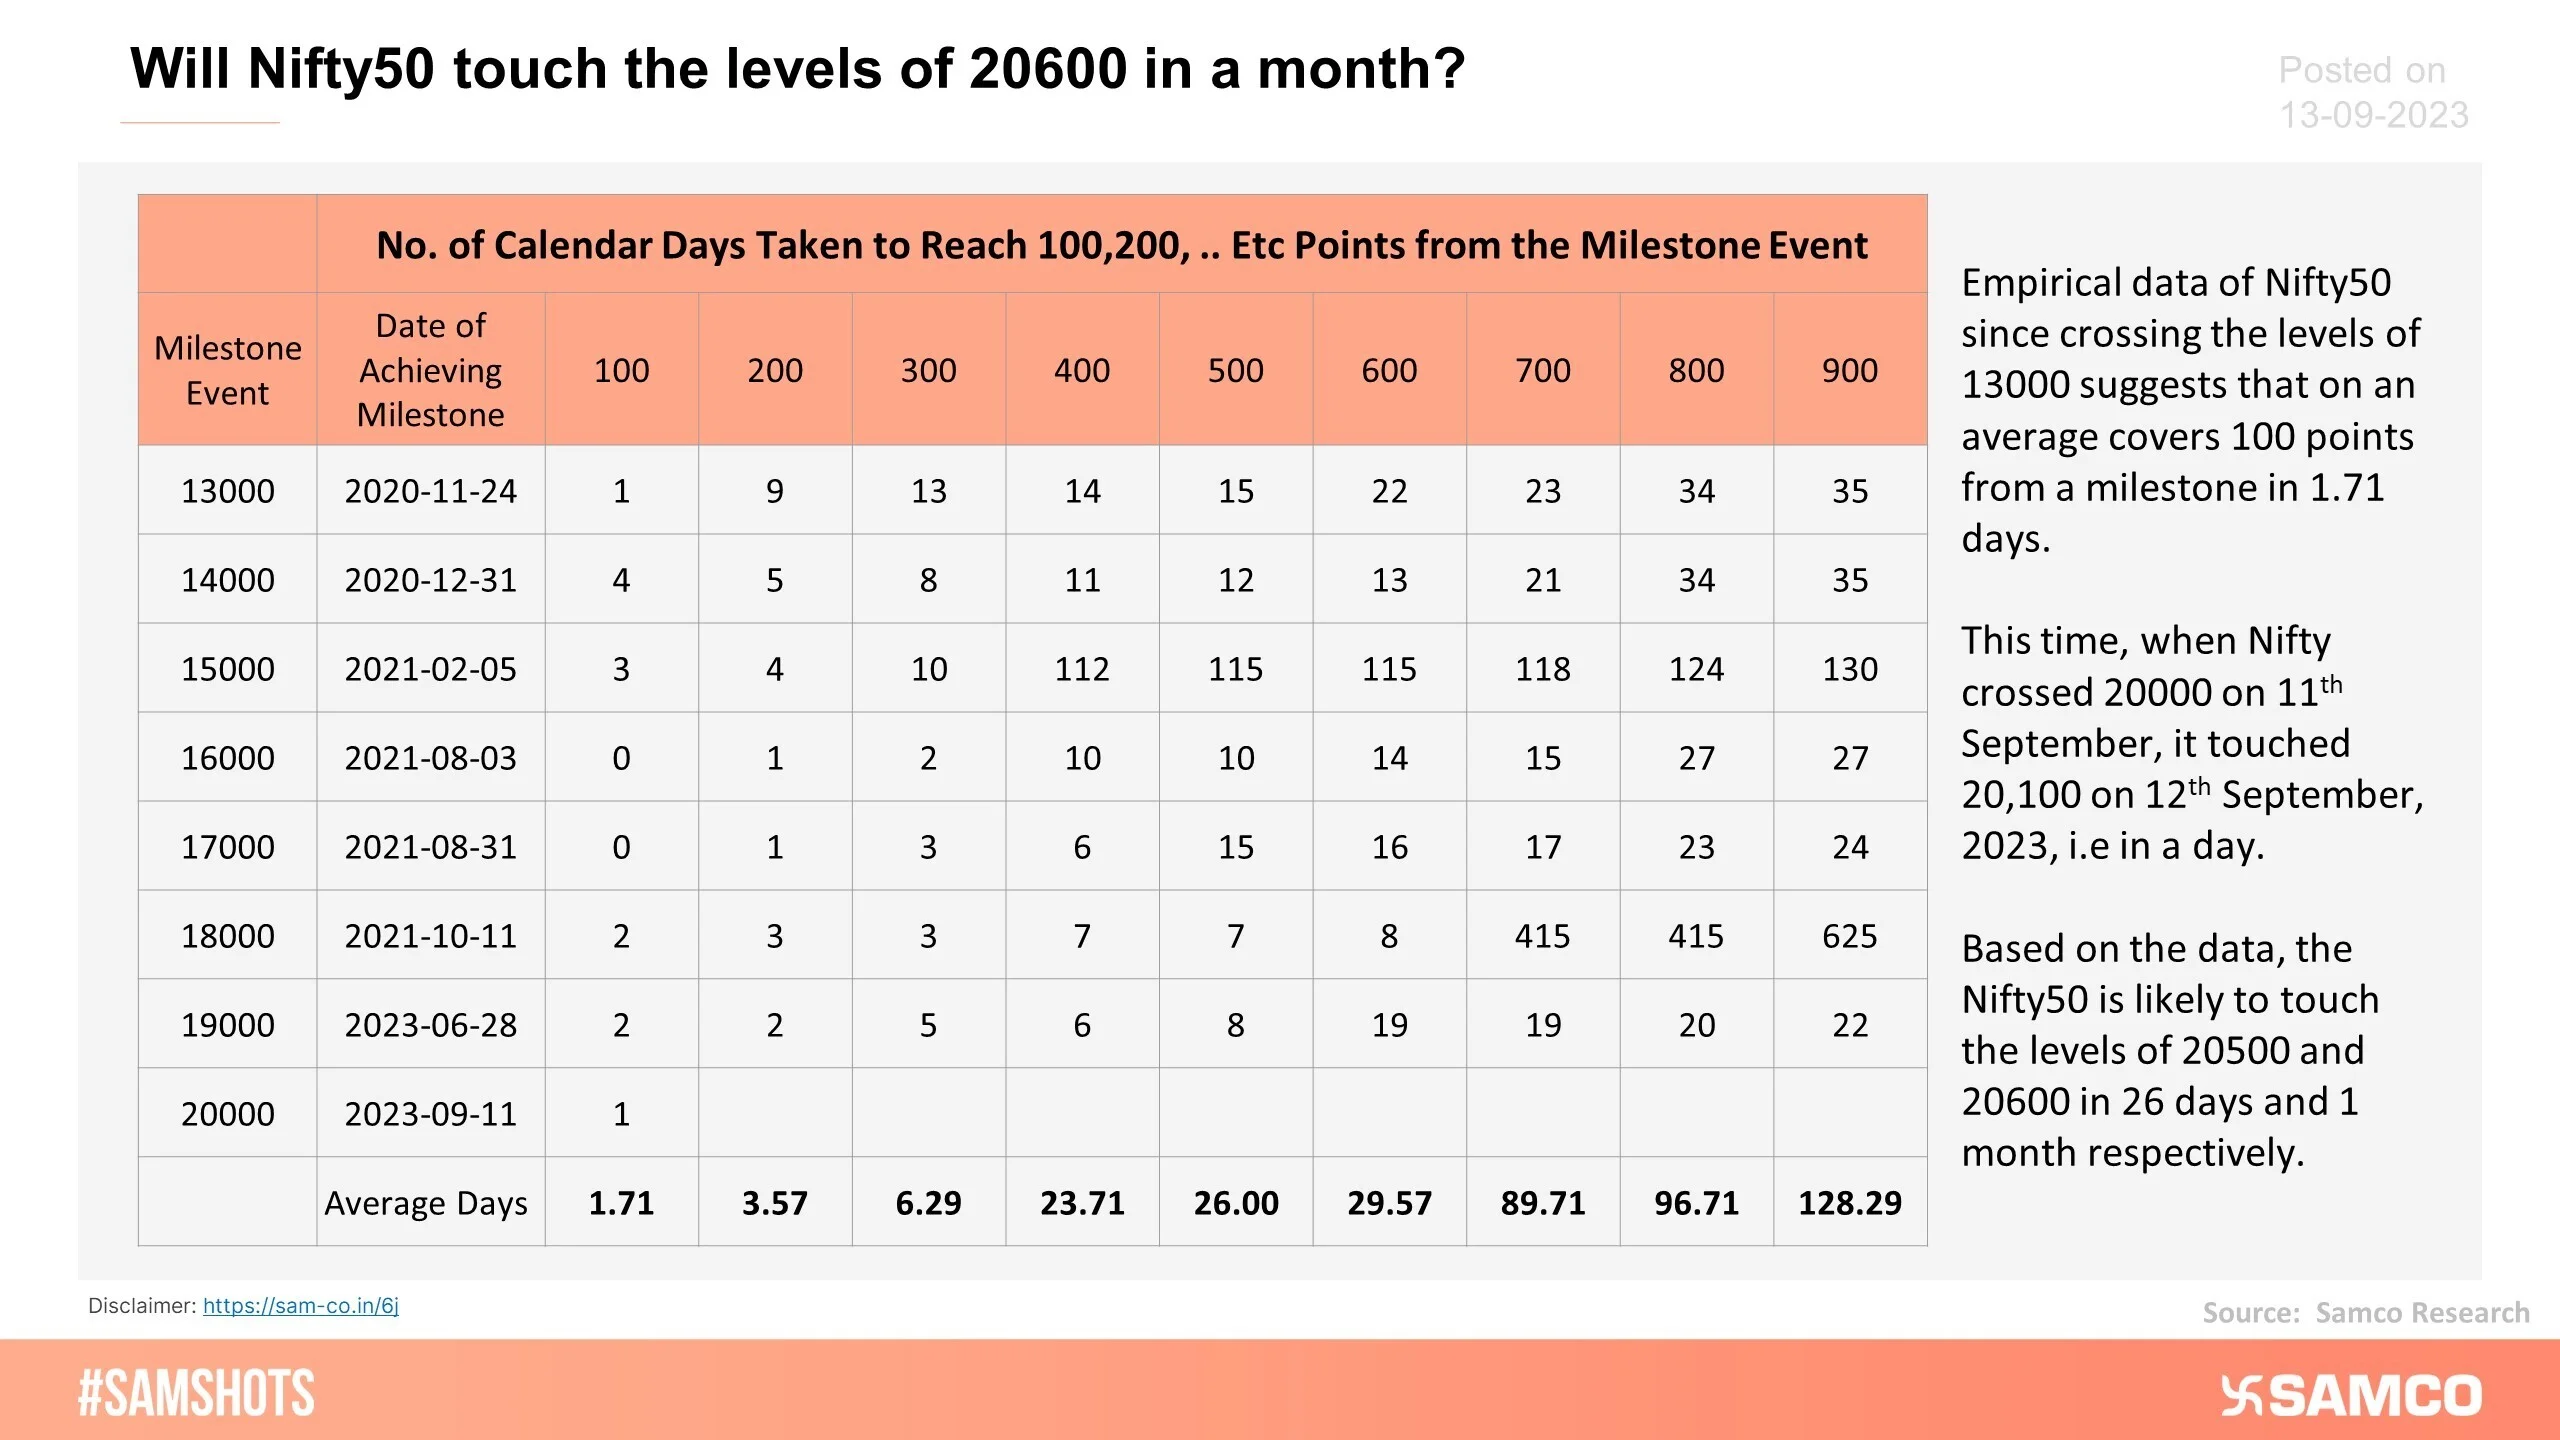 The table below shows the number of calendar days Nifty takes to achieve 100,200,… etc. points from a milestone event